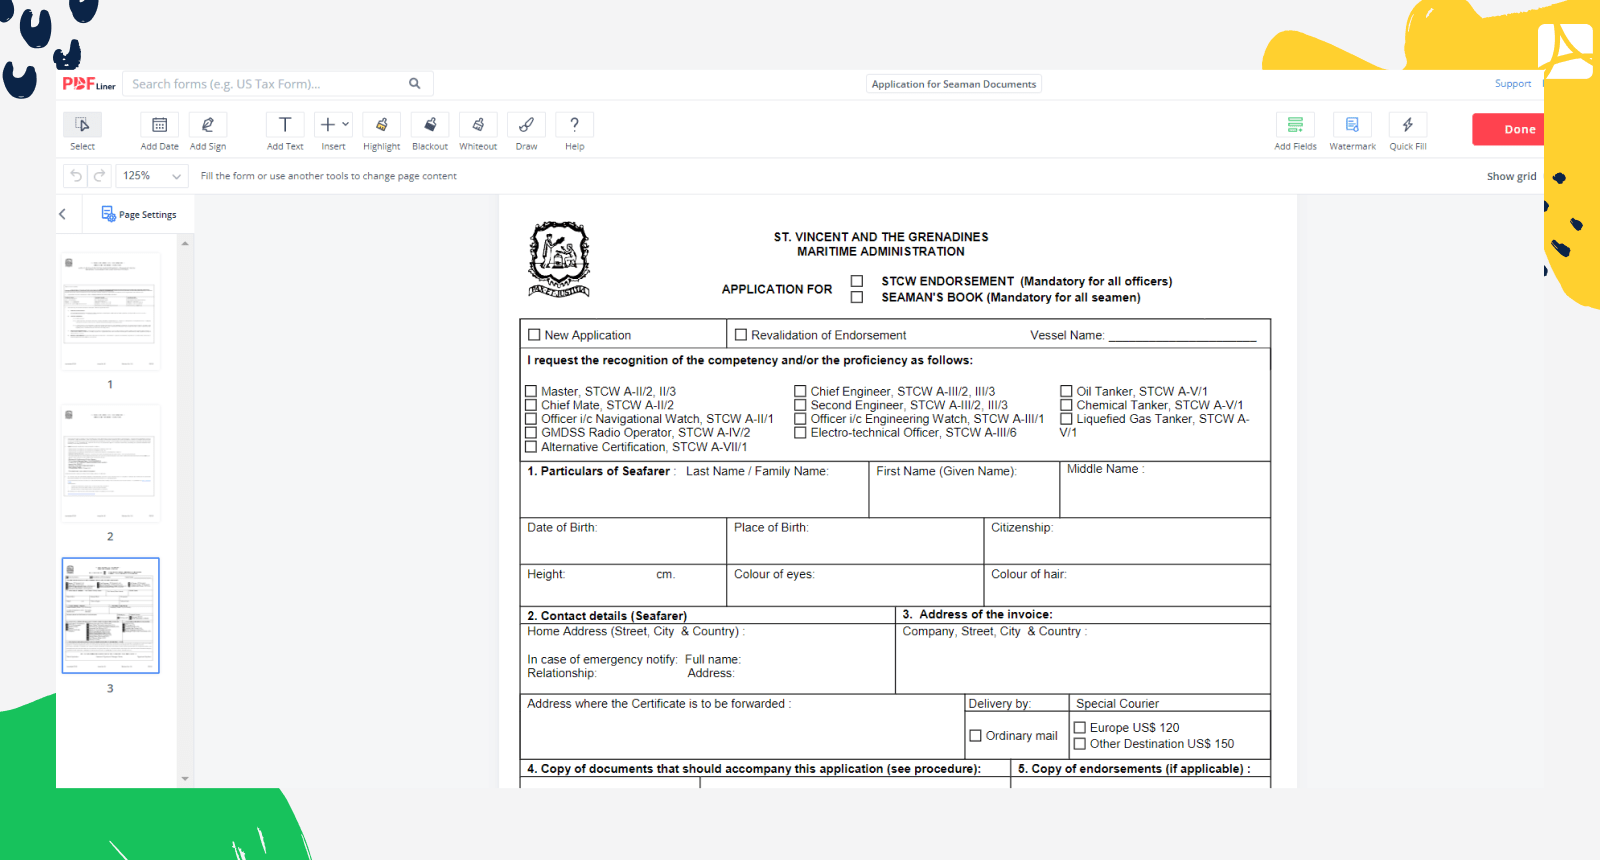 Application for Seaman Documents on PDFLiner